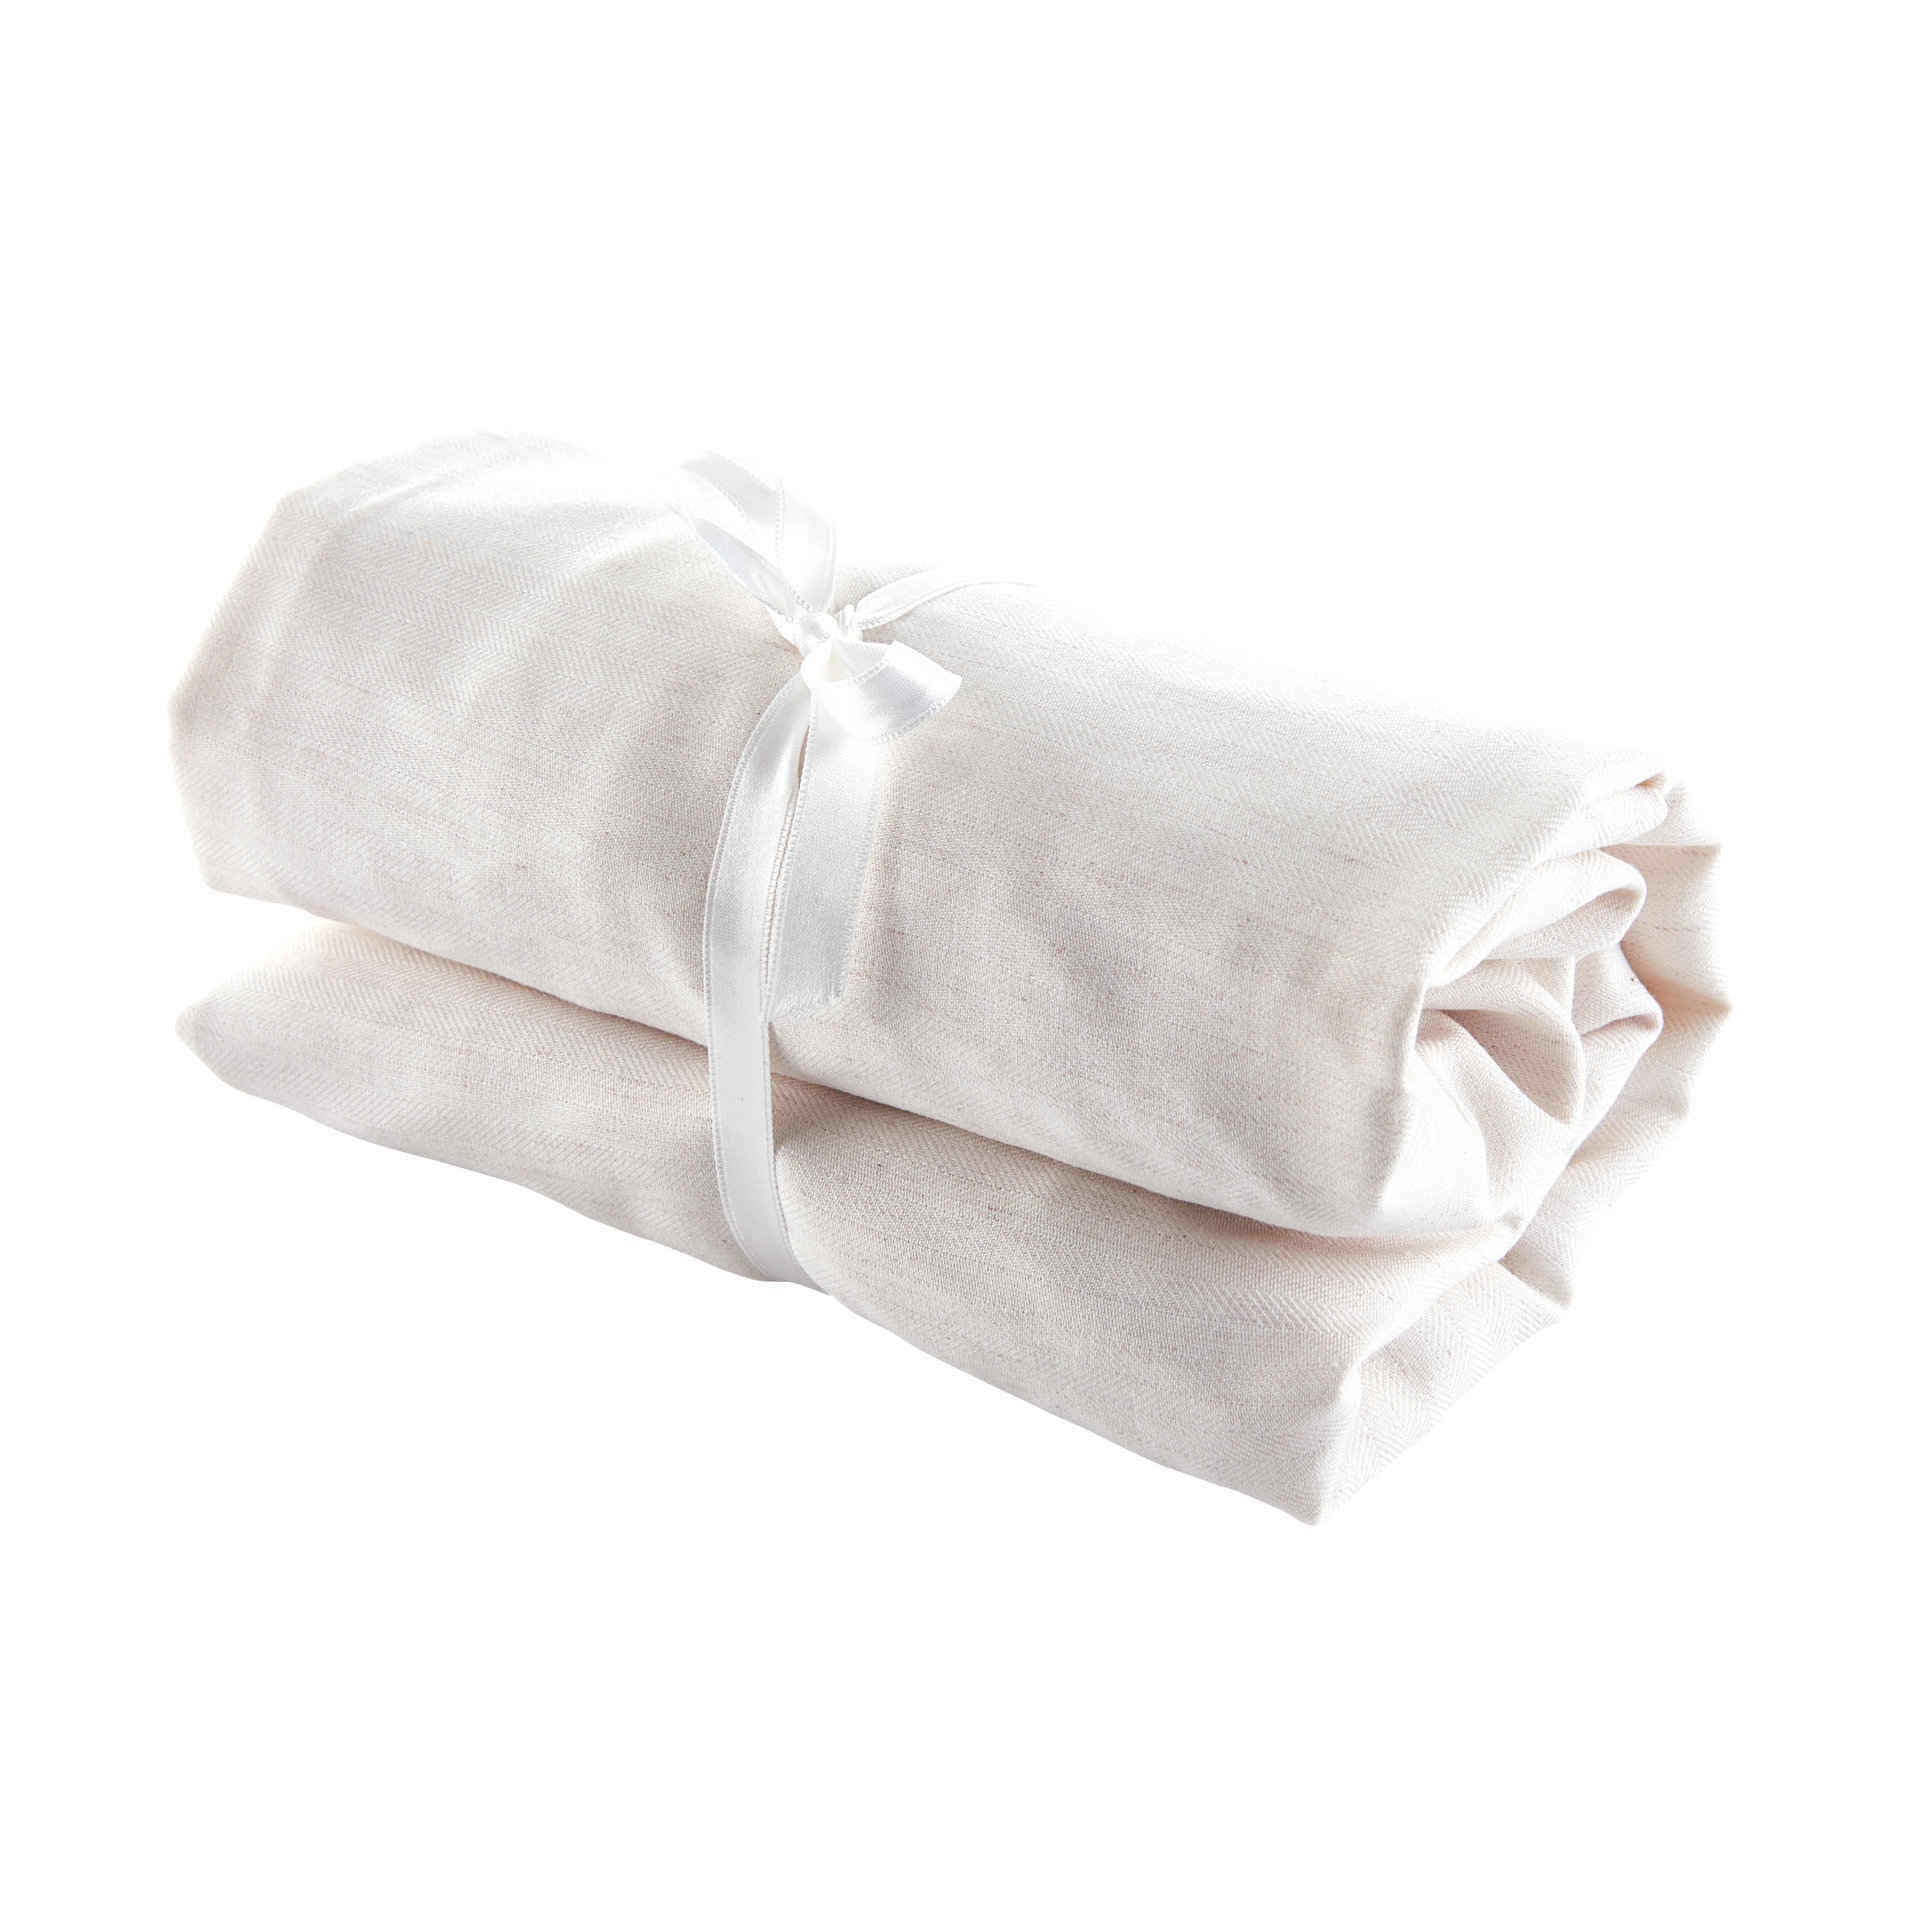 Theophile & Patachou Cradle Fitted Sheet - Sand